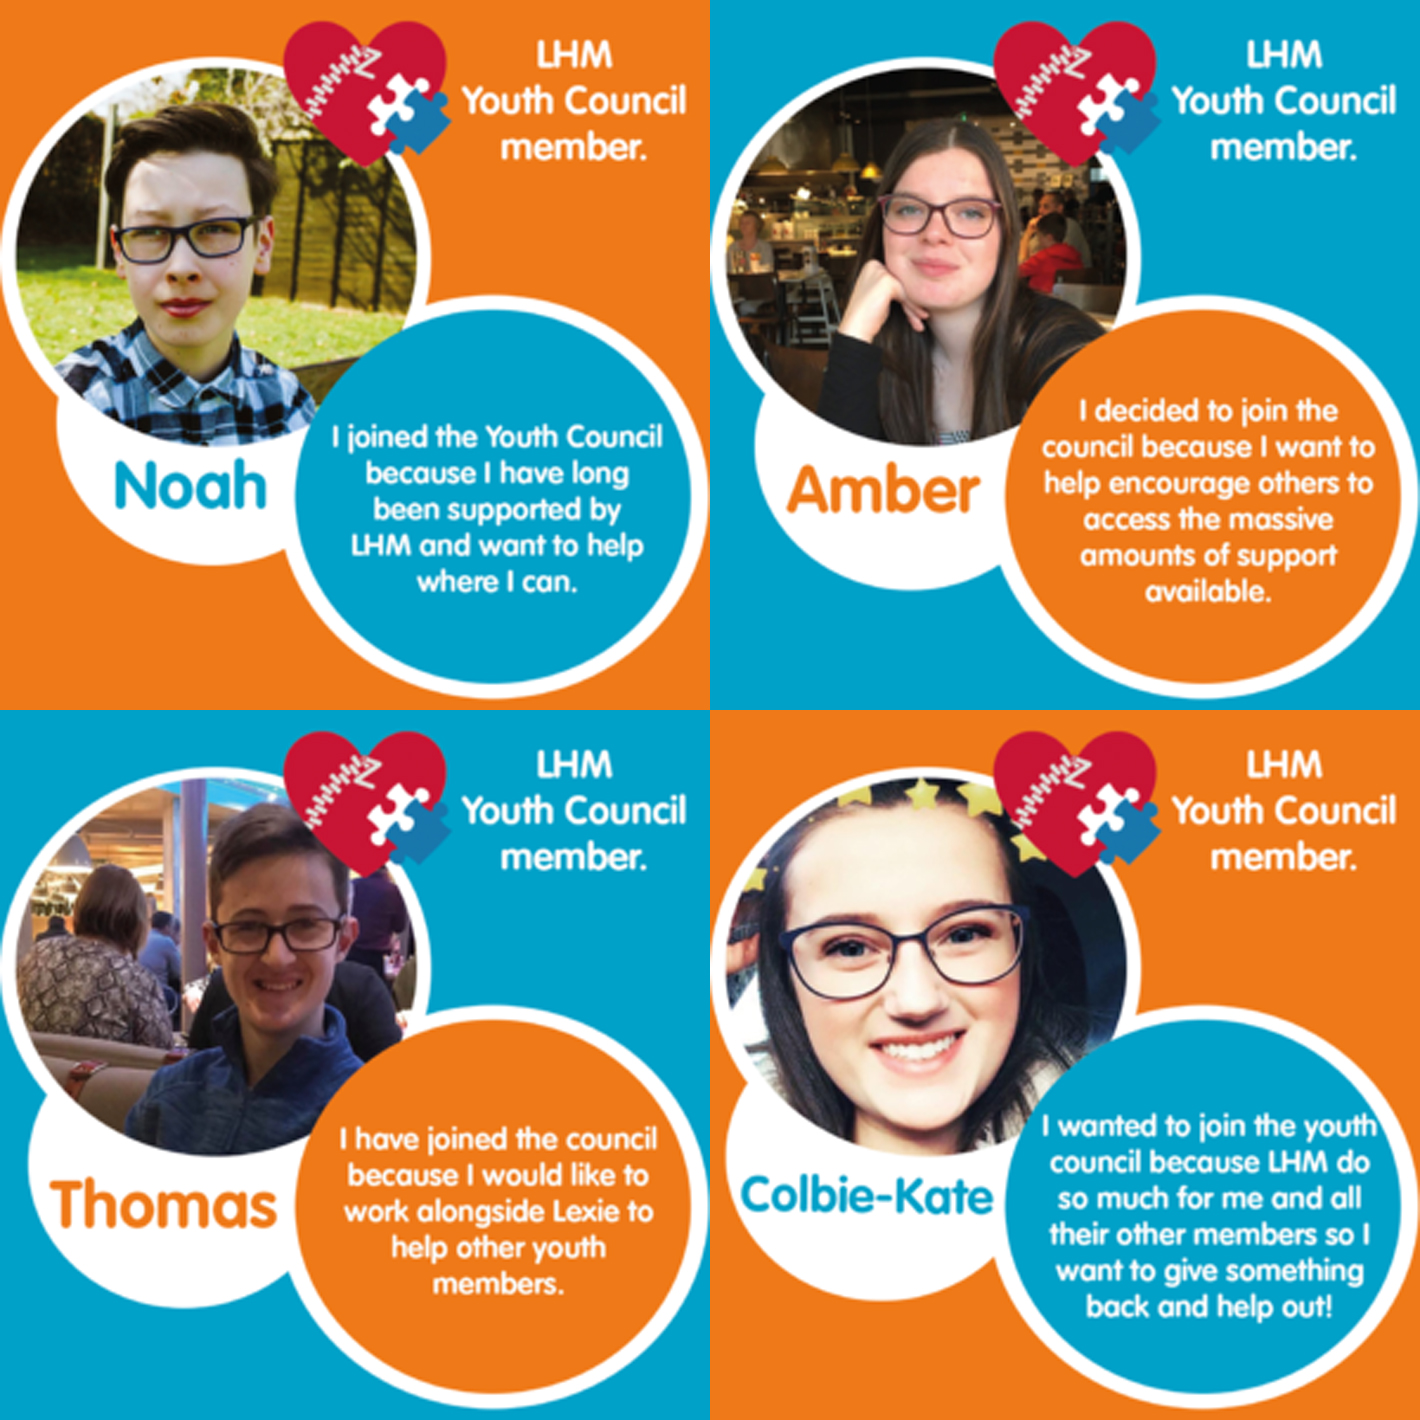 LHM's brand new youth council